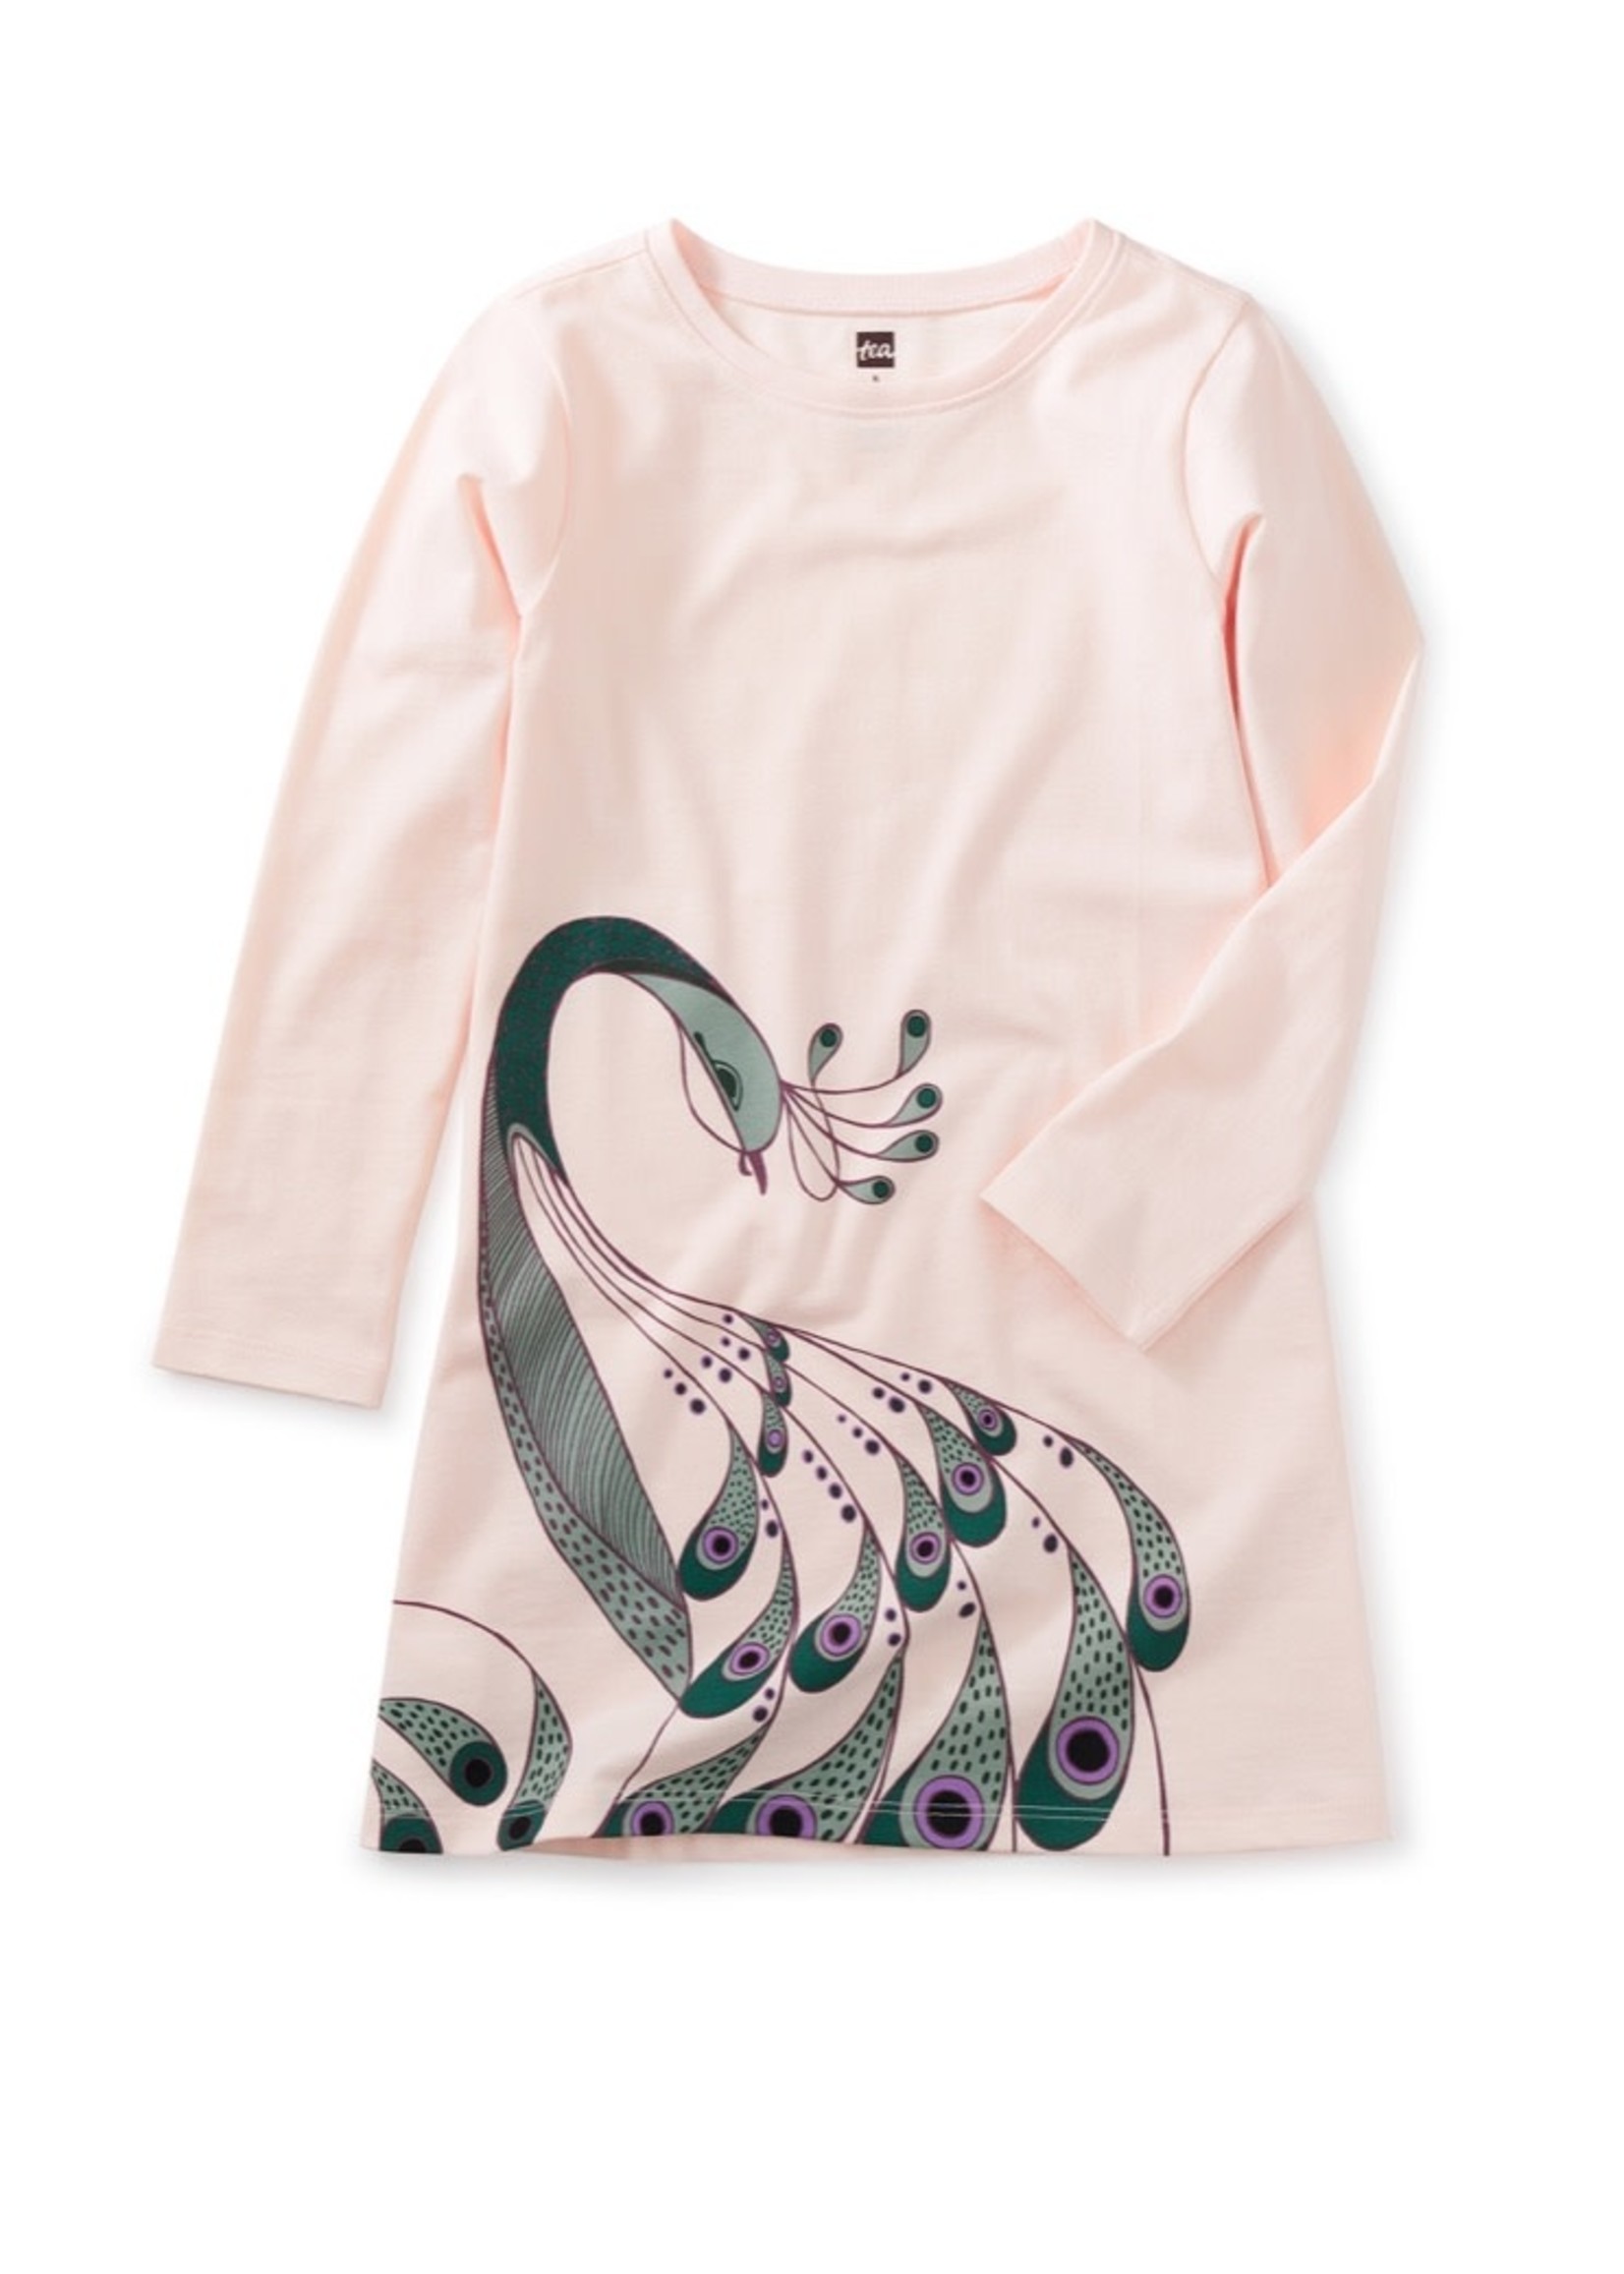 Tea Collection Tea Collection, Proud Peacock T-Shirt Dress in Creole Pink